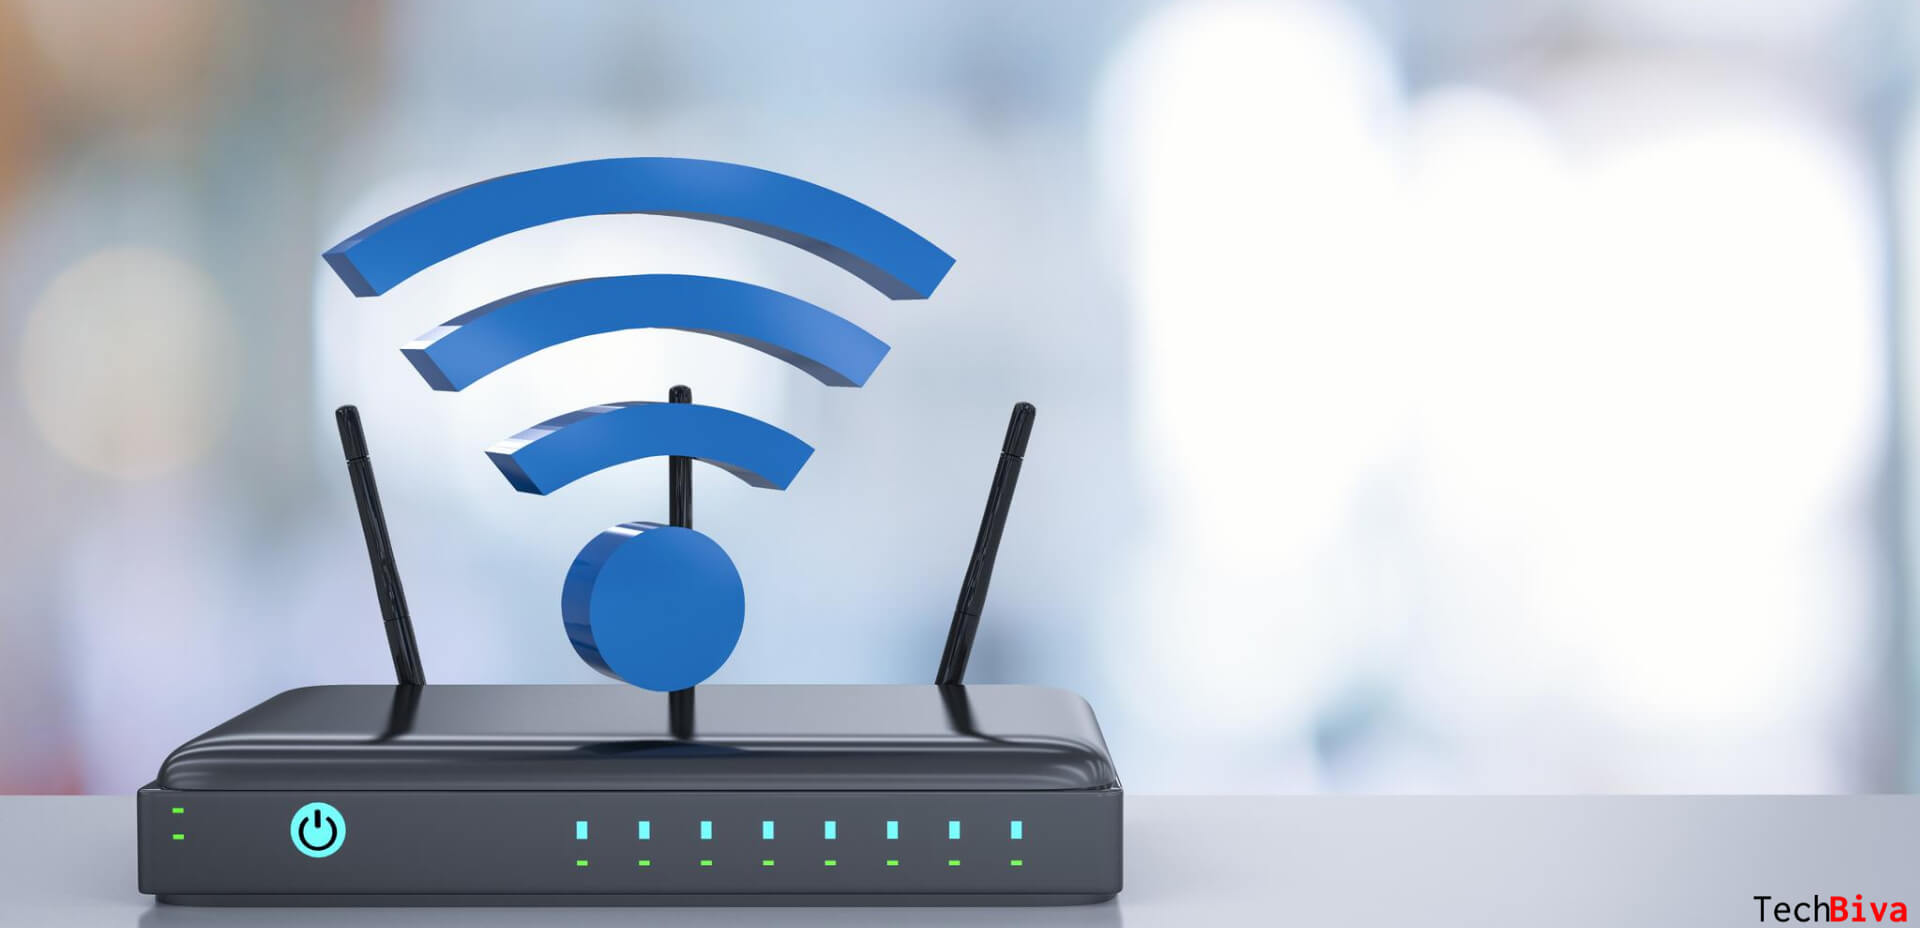 Boost WiFi Signal On Router